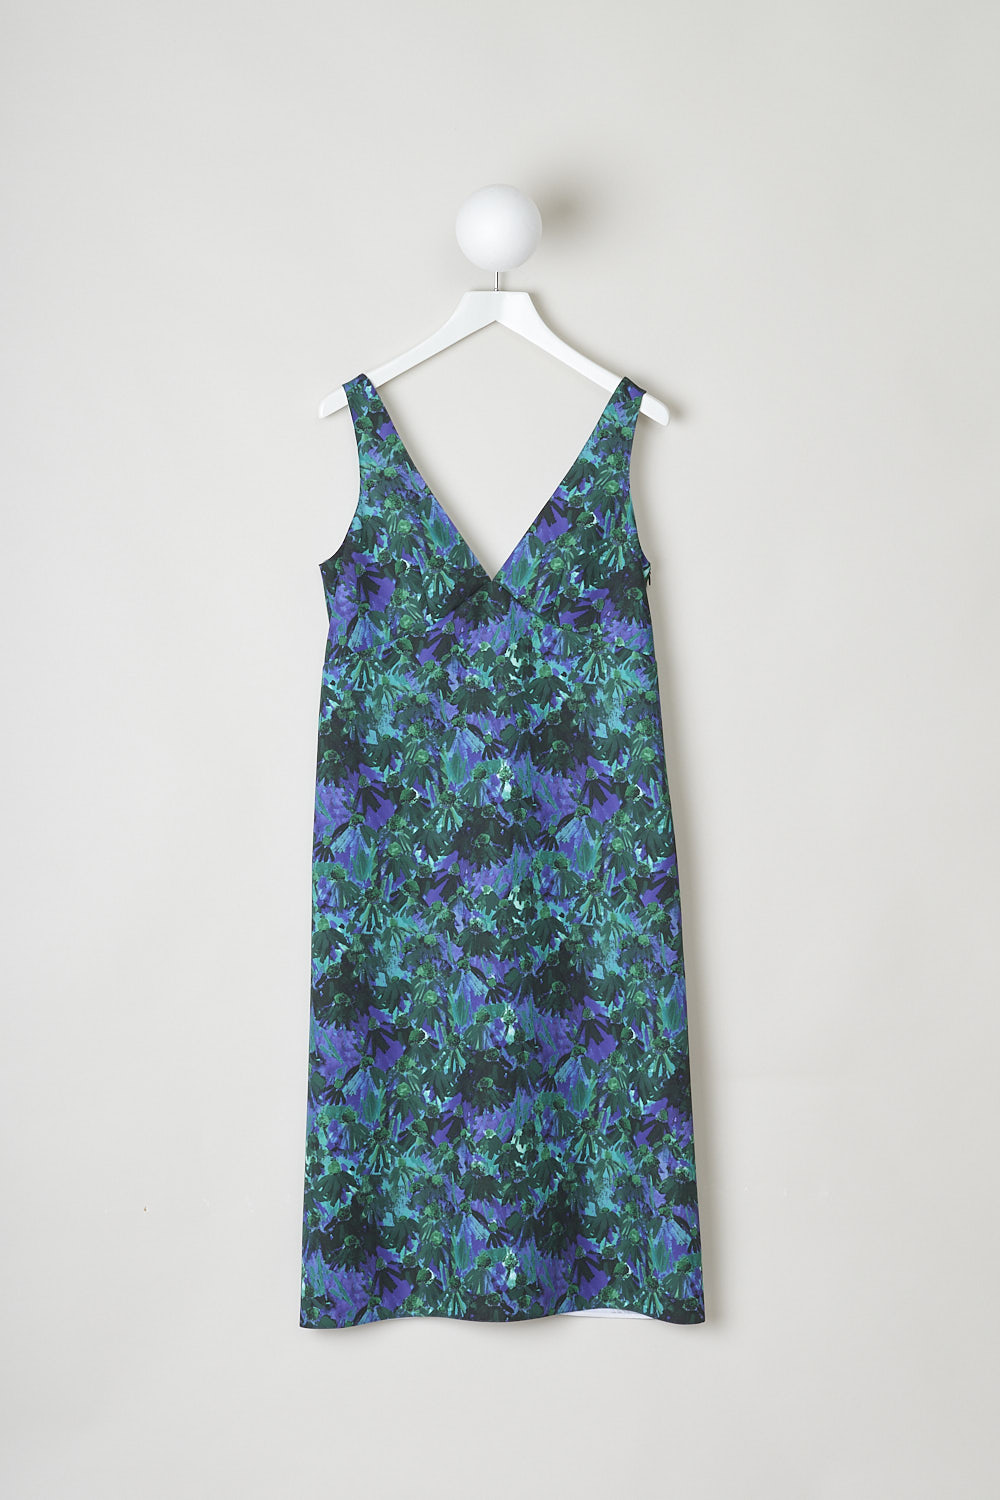 PLAN C, MULTICOLORED FLORAL SHIFT DRESS, ABCAA09NB8_TP069_FIV02_GREEN_CLOVER, Print, Front, This sleeveless midi dress has a shift style silhouette with a V-neckline. The dress has a multicolored floral print throughout. The dress has a concealed side zipper. 
